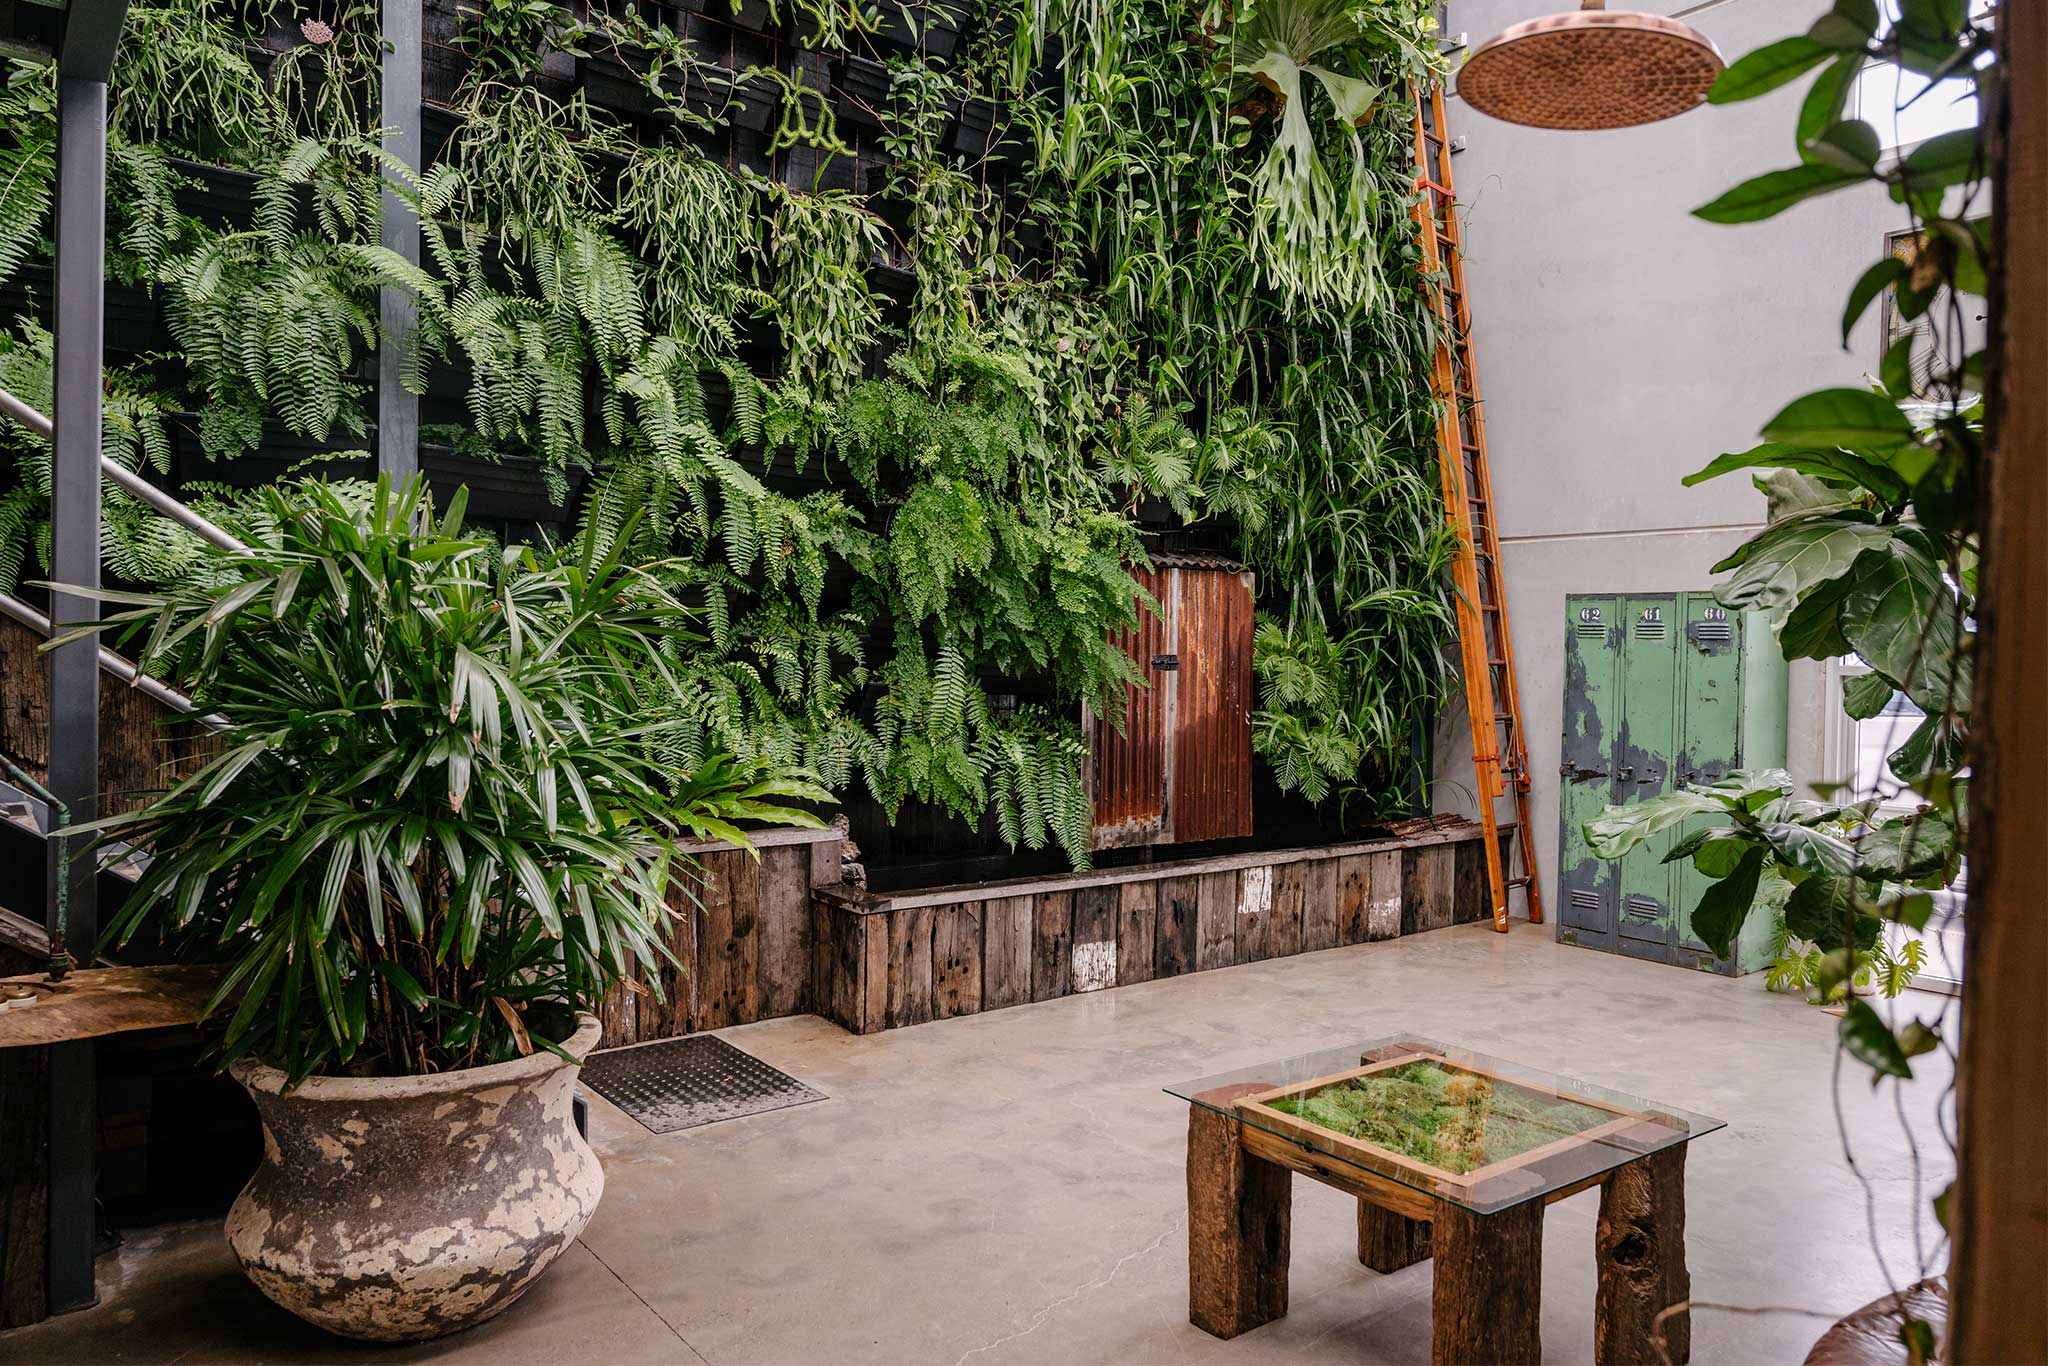 Plant Wall Commercial Interior Fitout Central Coast - Project "MBS Green Giant" - plant wall with moss art coffee table and custom outdoor shower in foreground